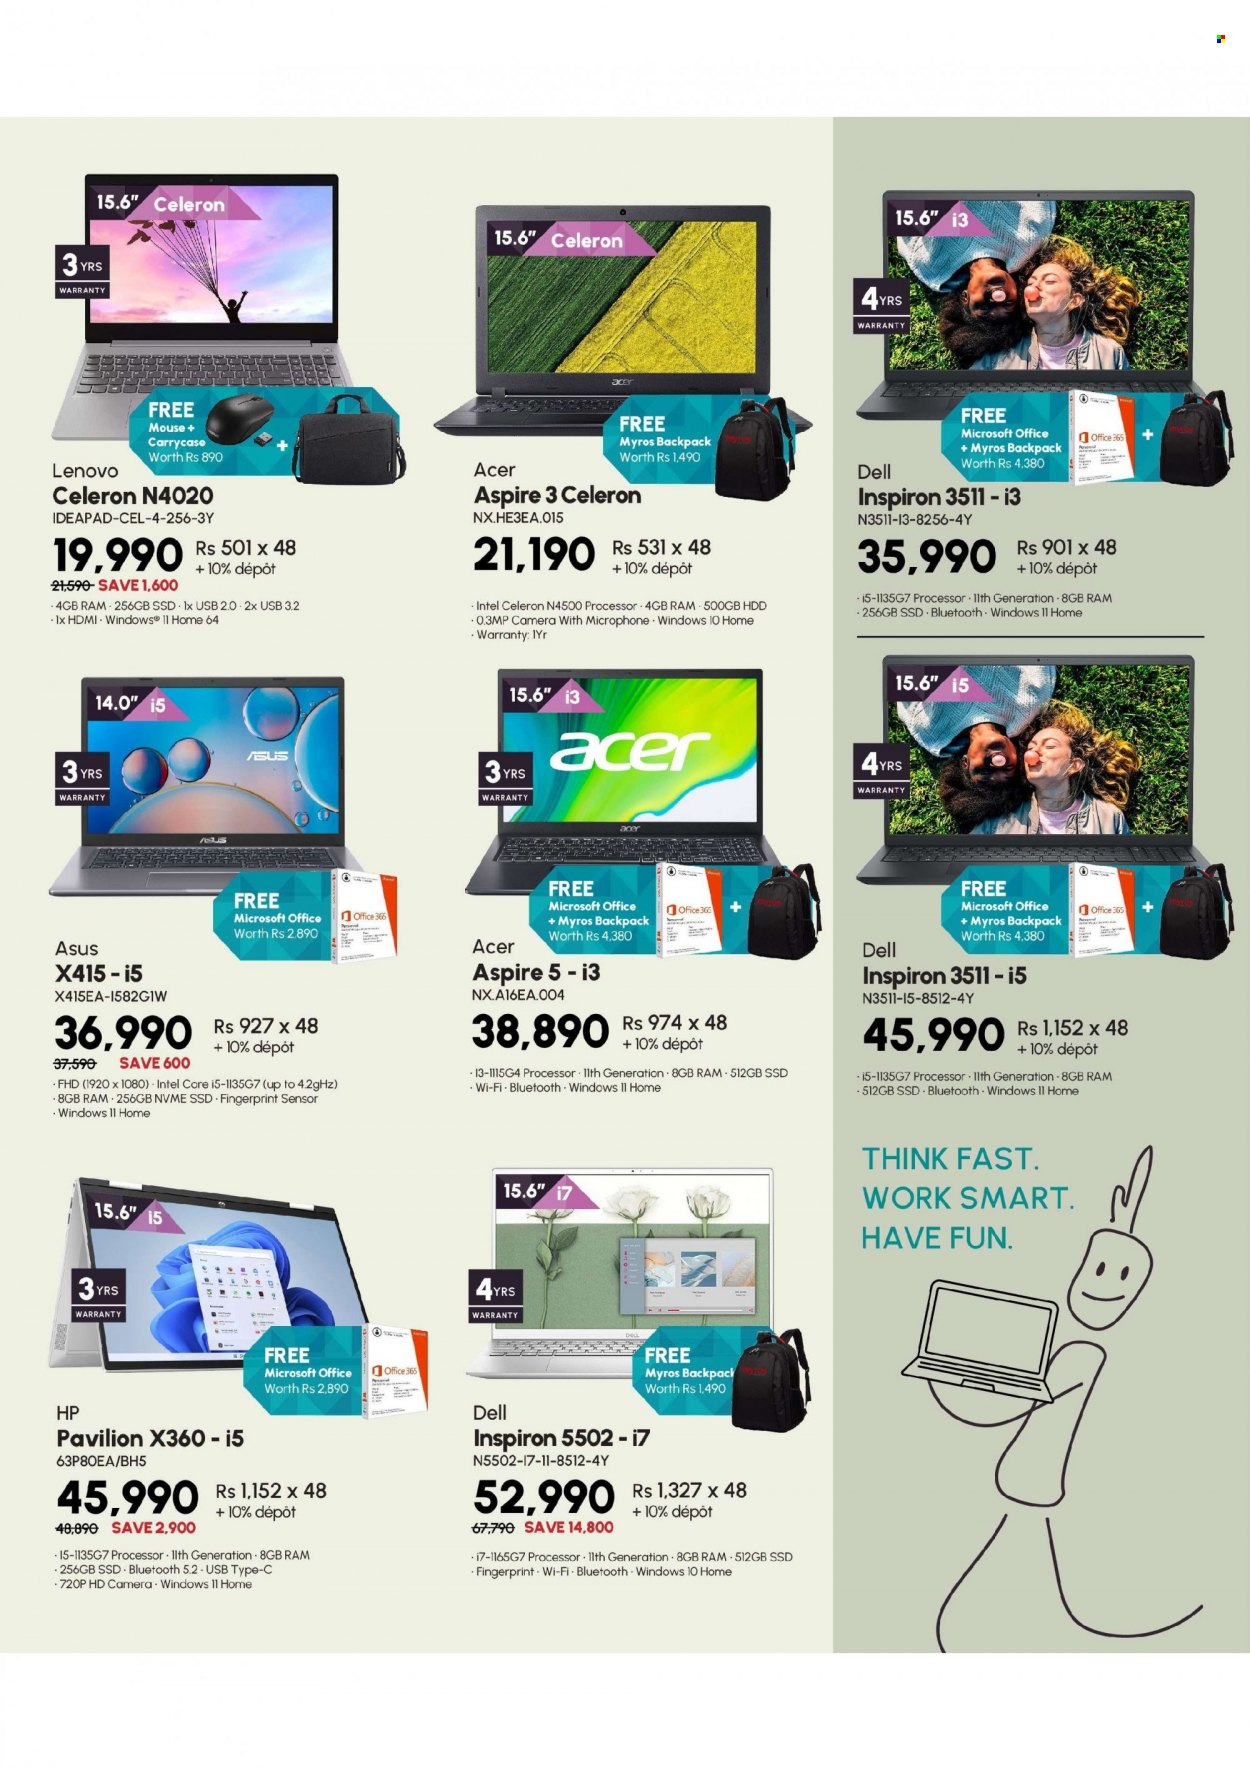 Galaxy Catalogue - Sales products - Intel, Office 365, Acer, Hewlett Packard, Inspiron, mouse, backpack, Asus, camera, Dell, Lenovo. Page 2.